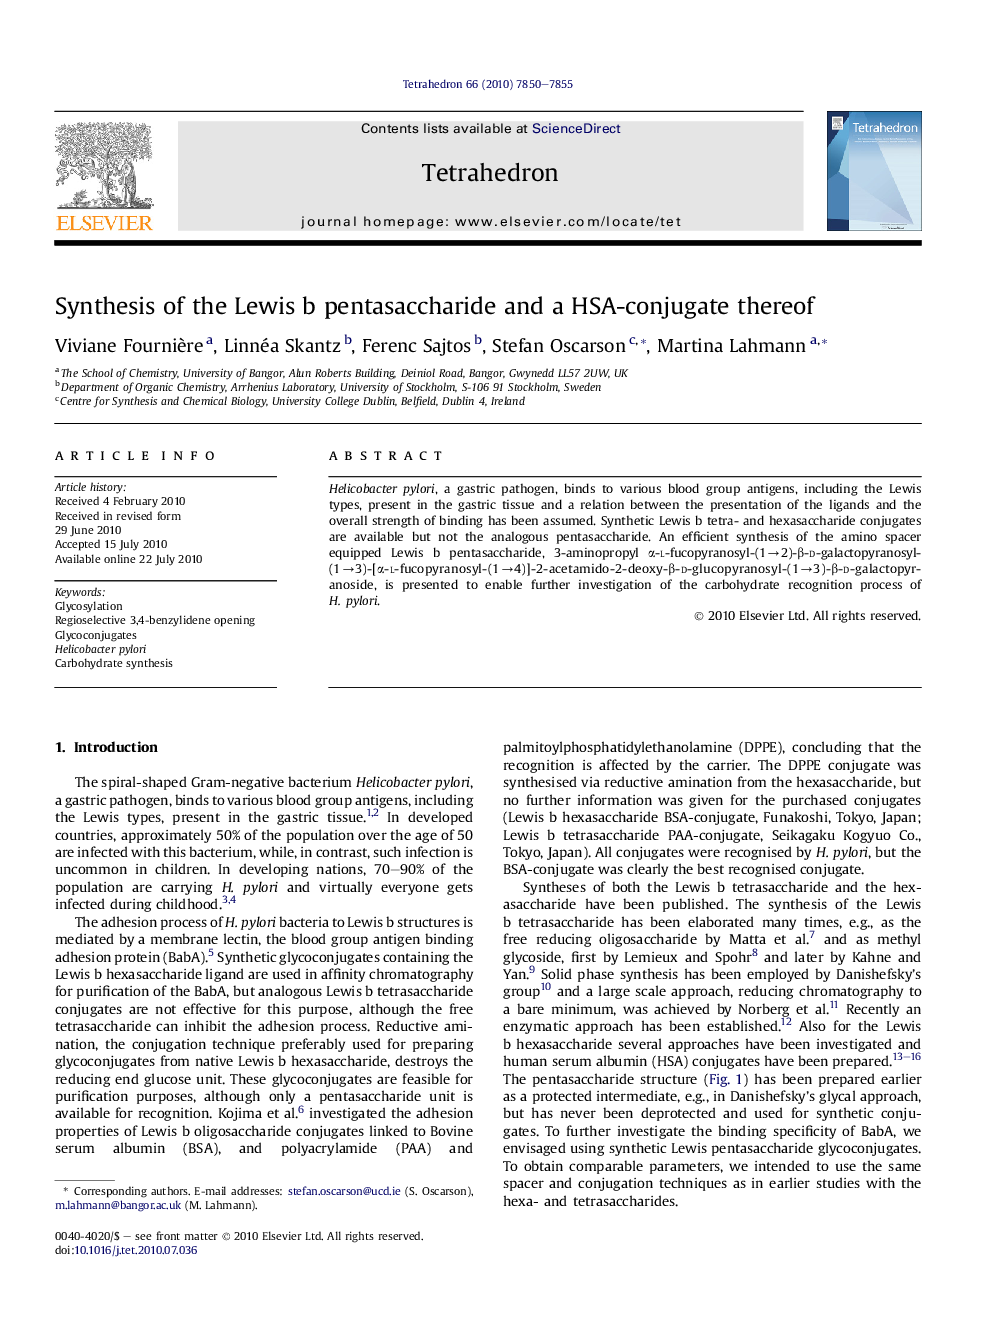 Synthesis of the Lewis b pentasaccharide and a HSA-conjugate thereof